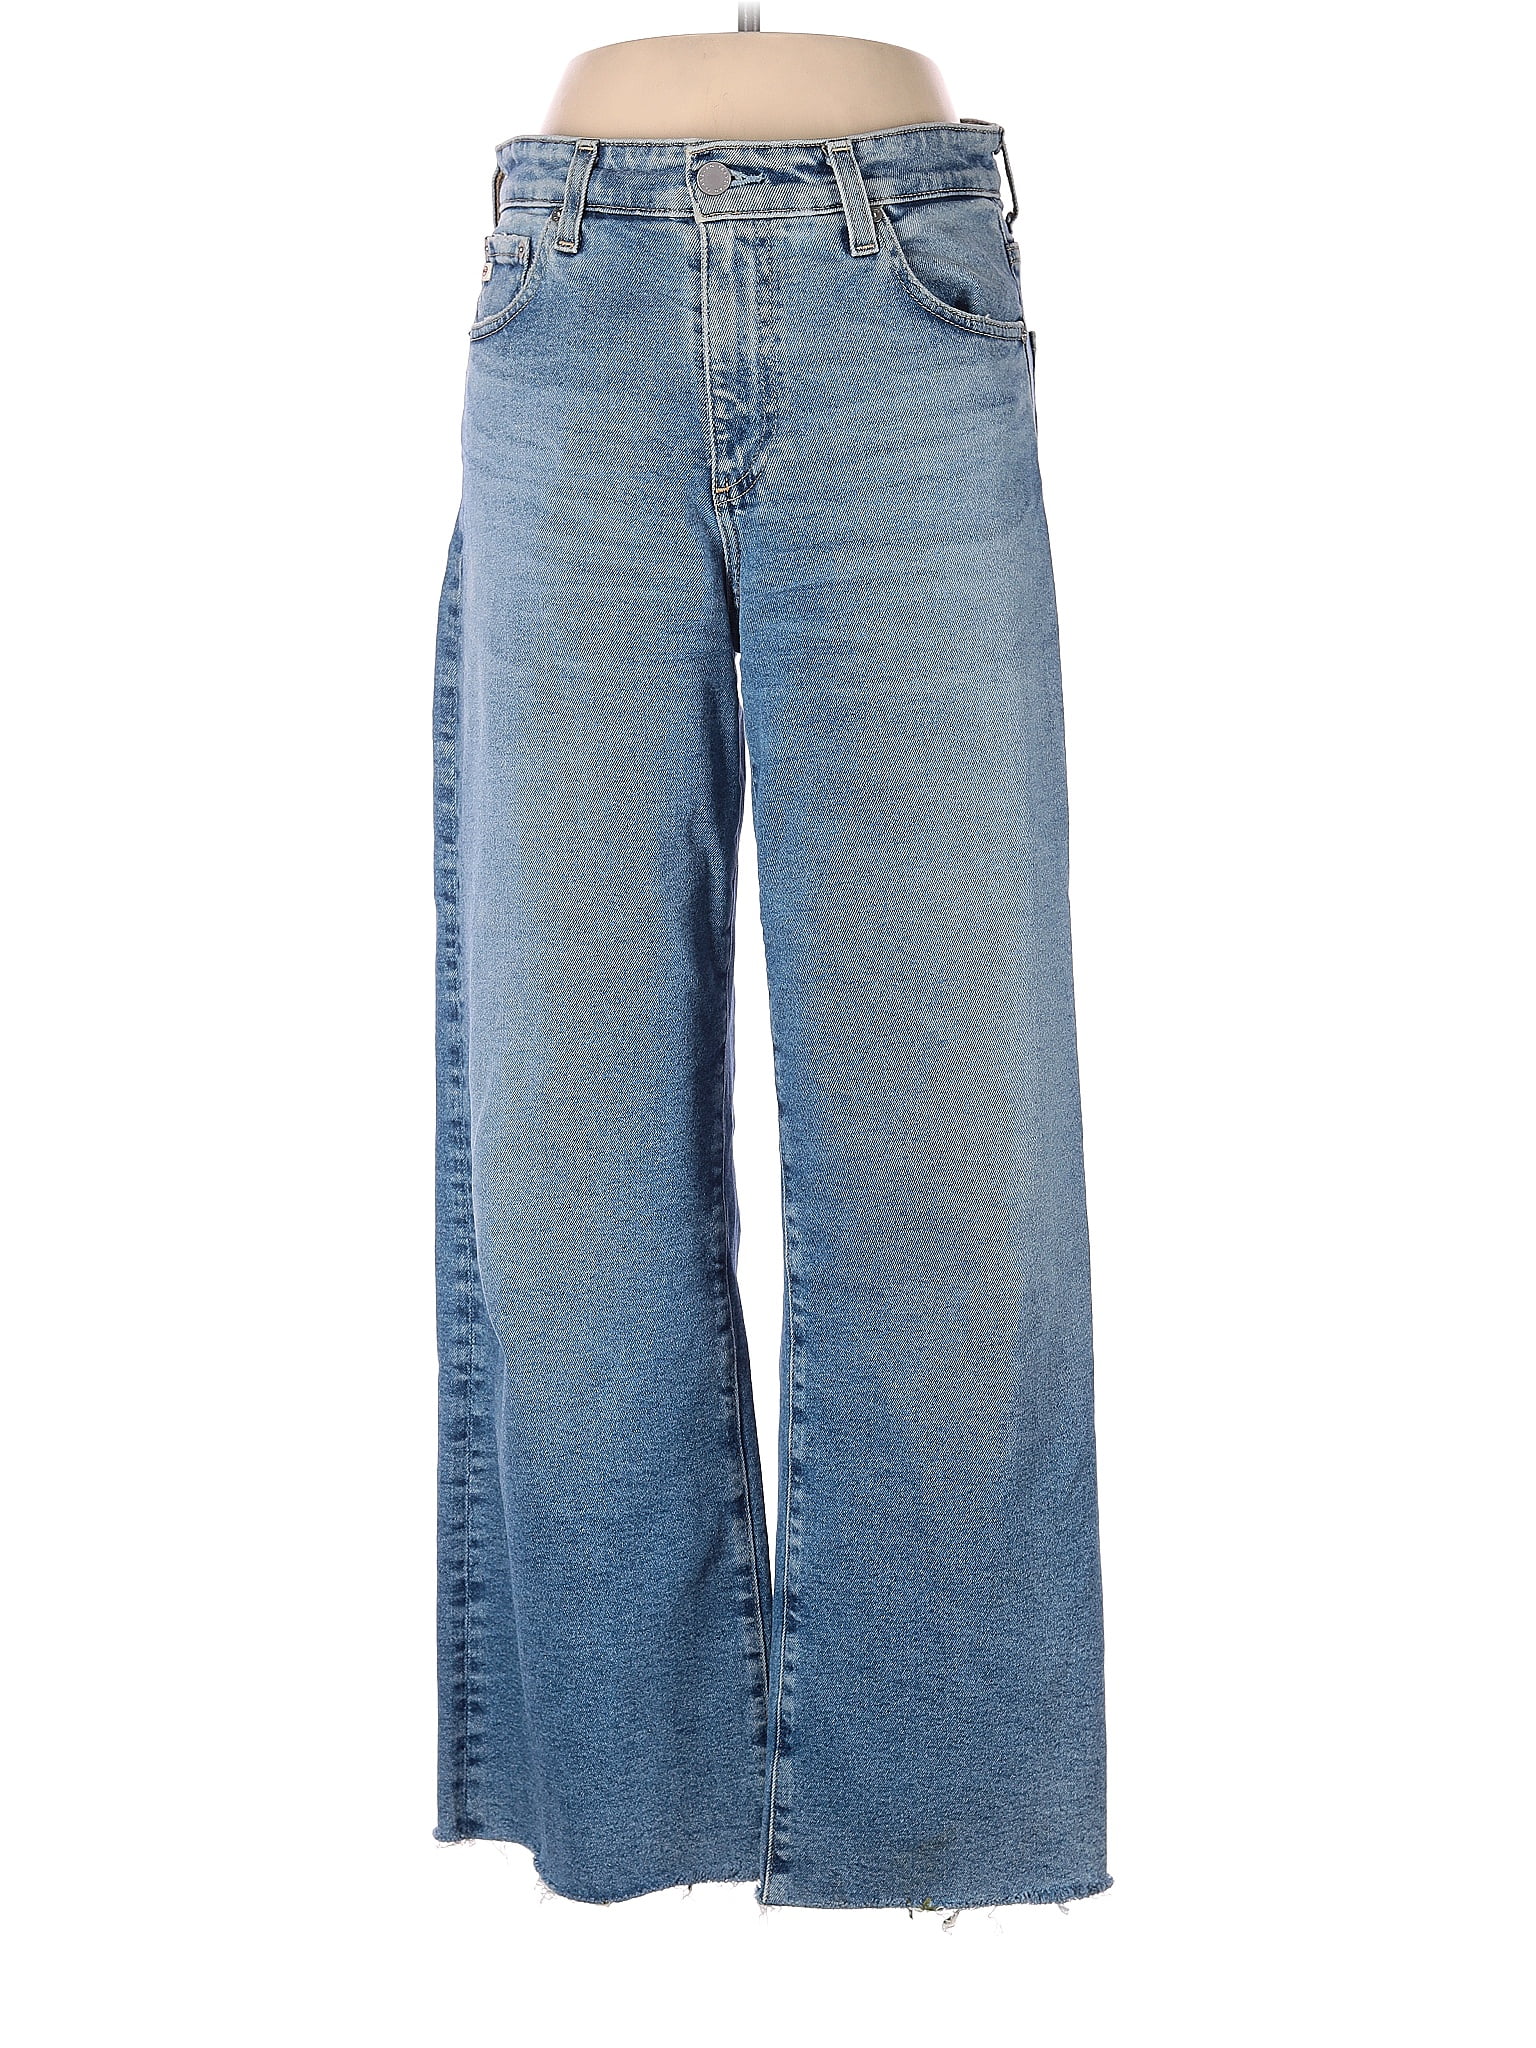 Adriano Goldschmied Solid Blue Jeans 28 Waist - 78% off | thredUP